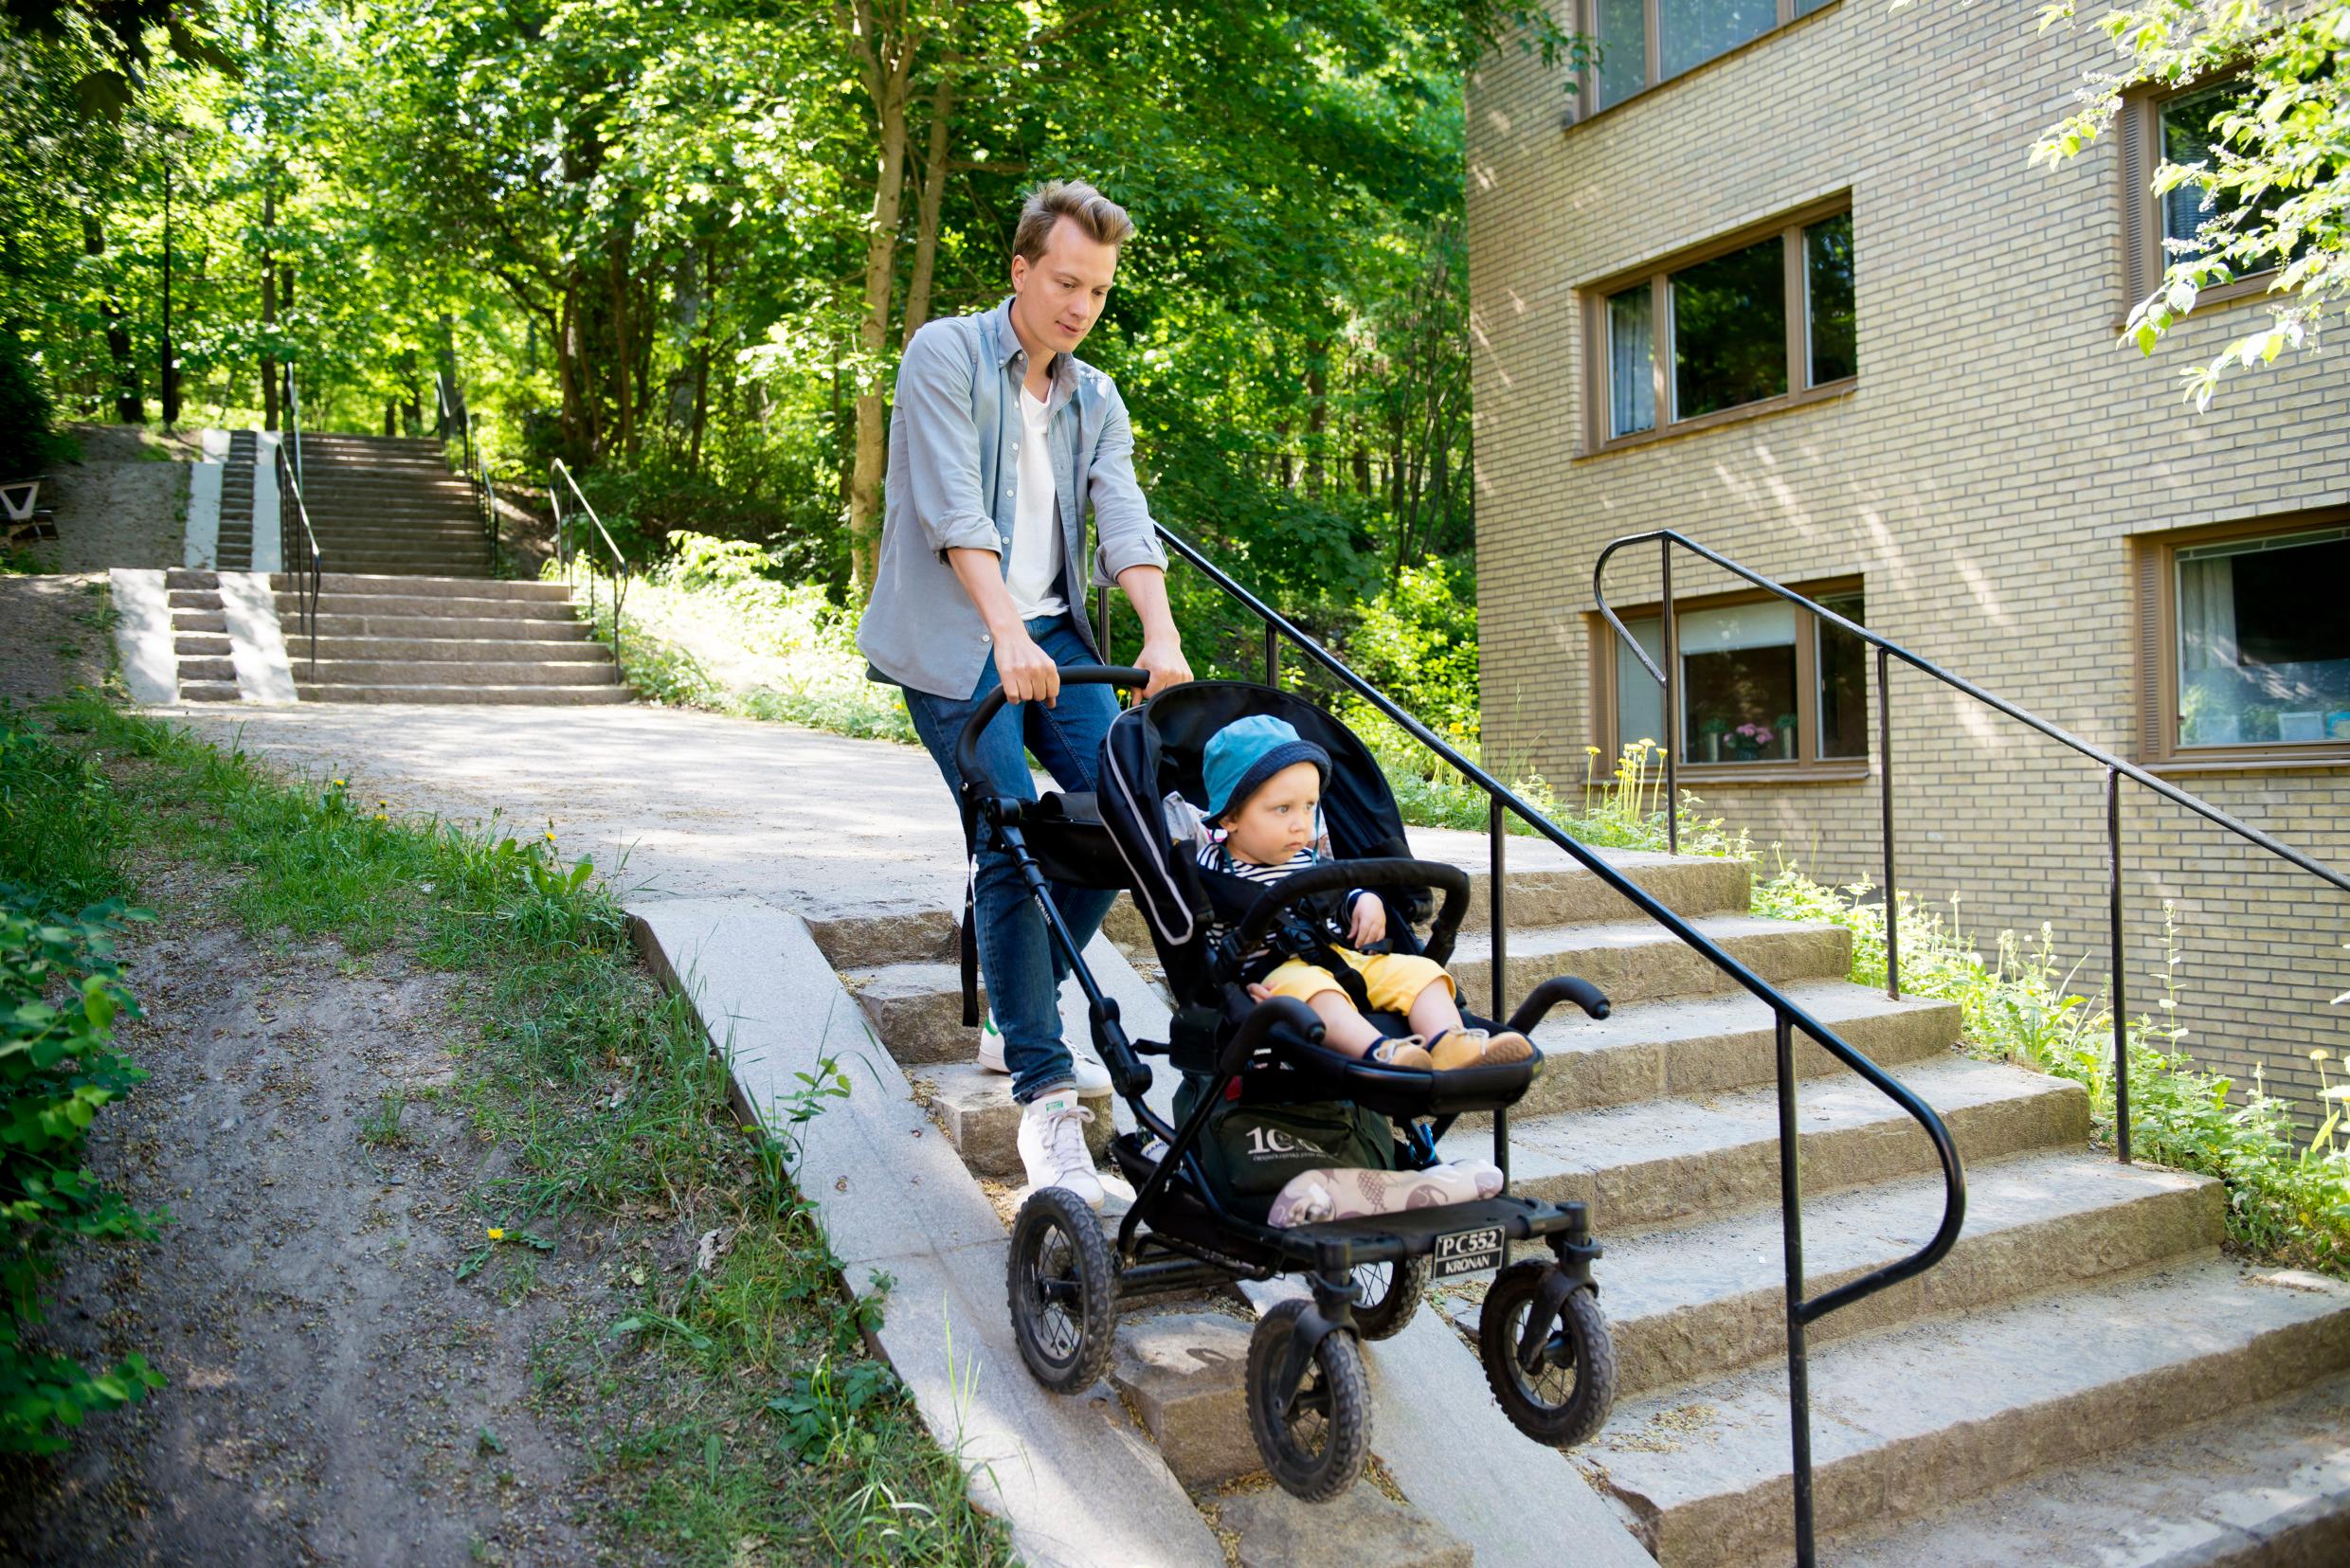 A man pushes a baby stroller down a ramp next to some steps.